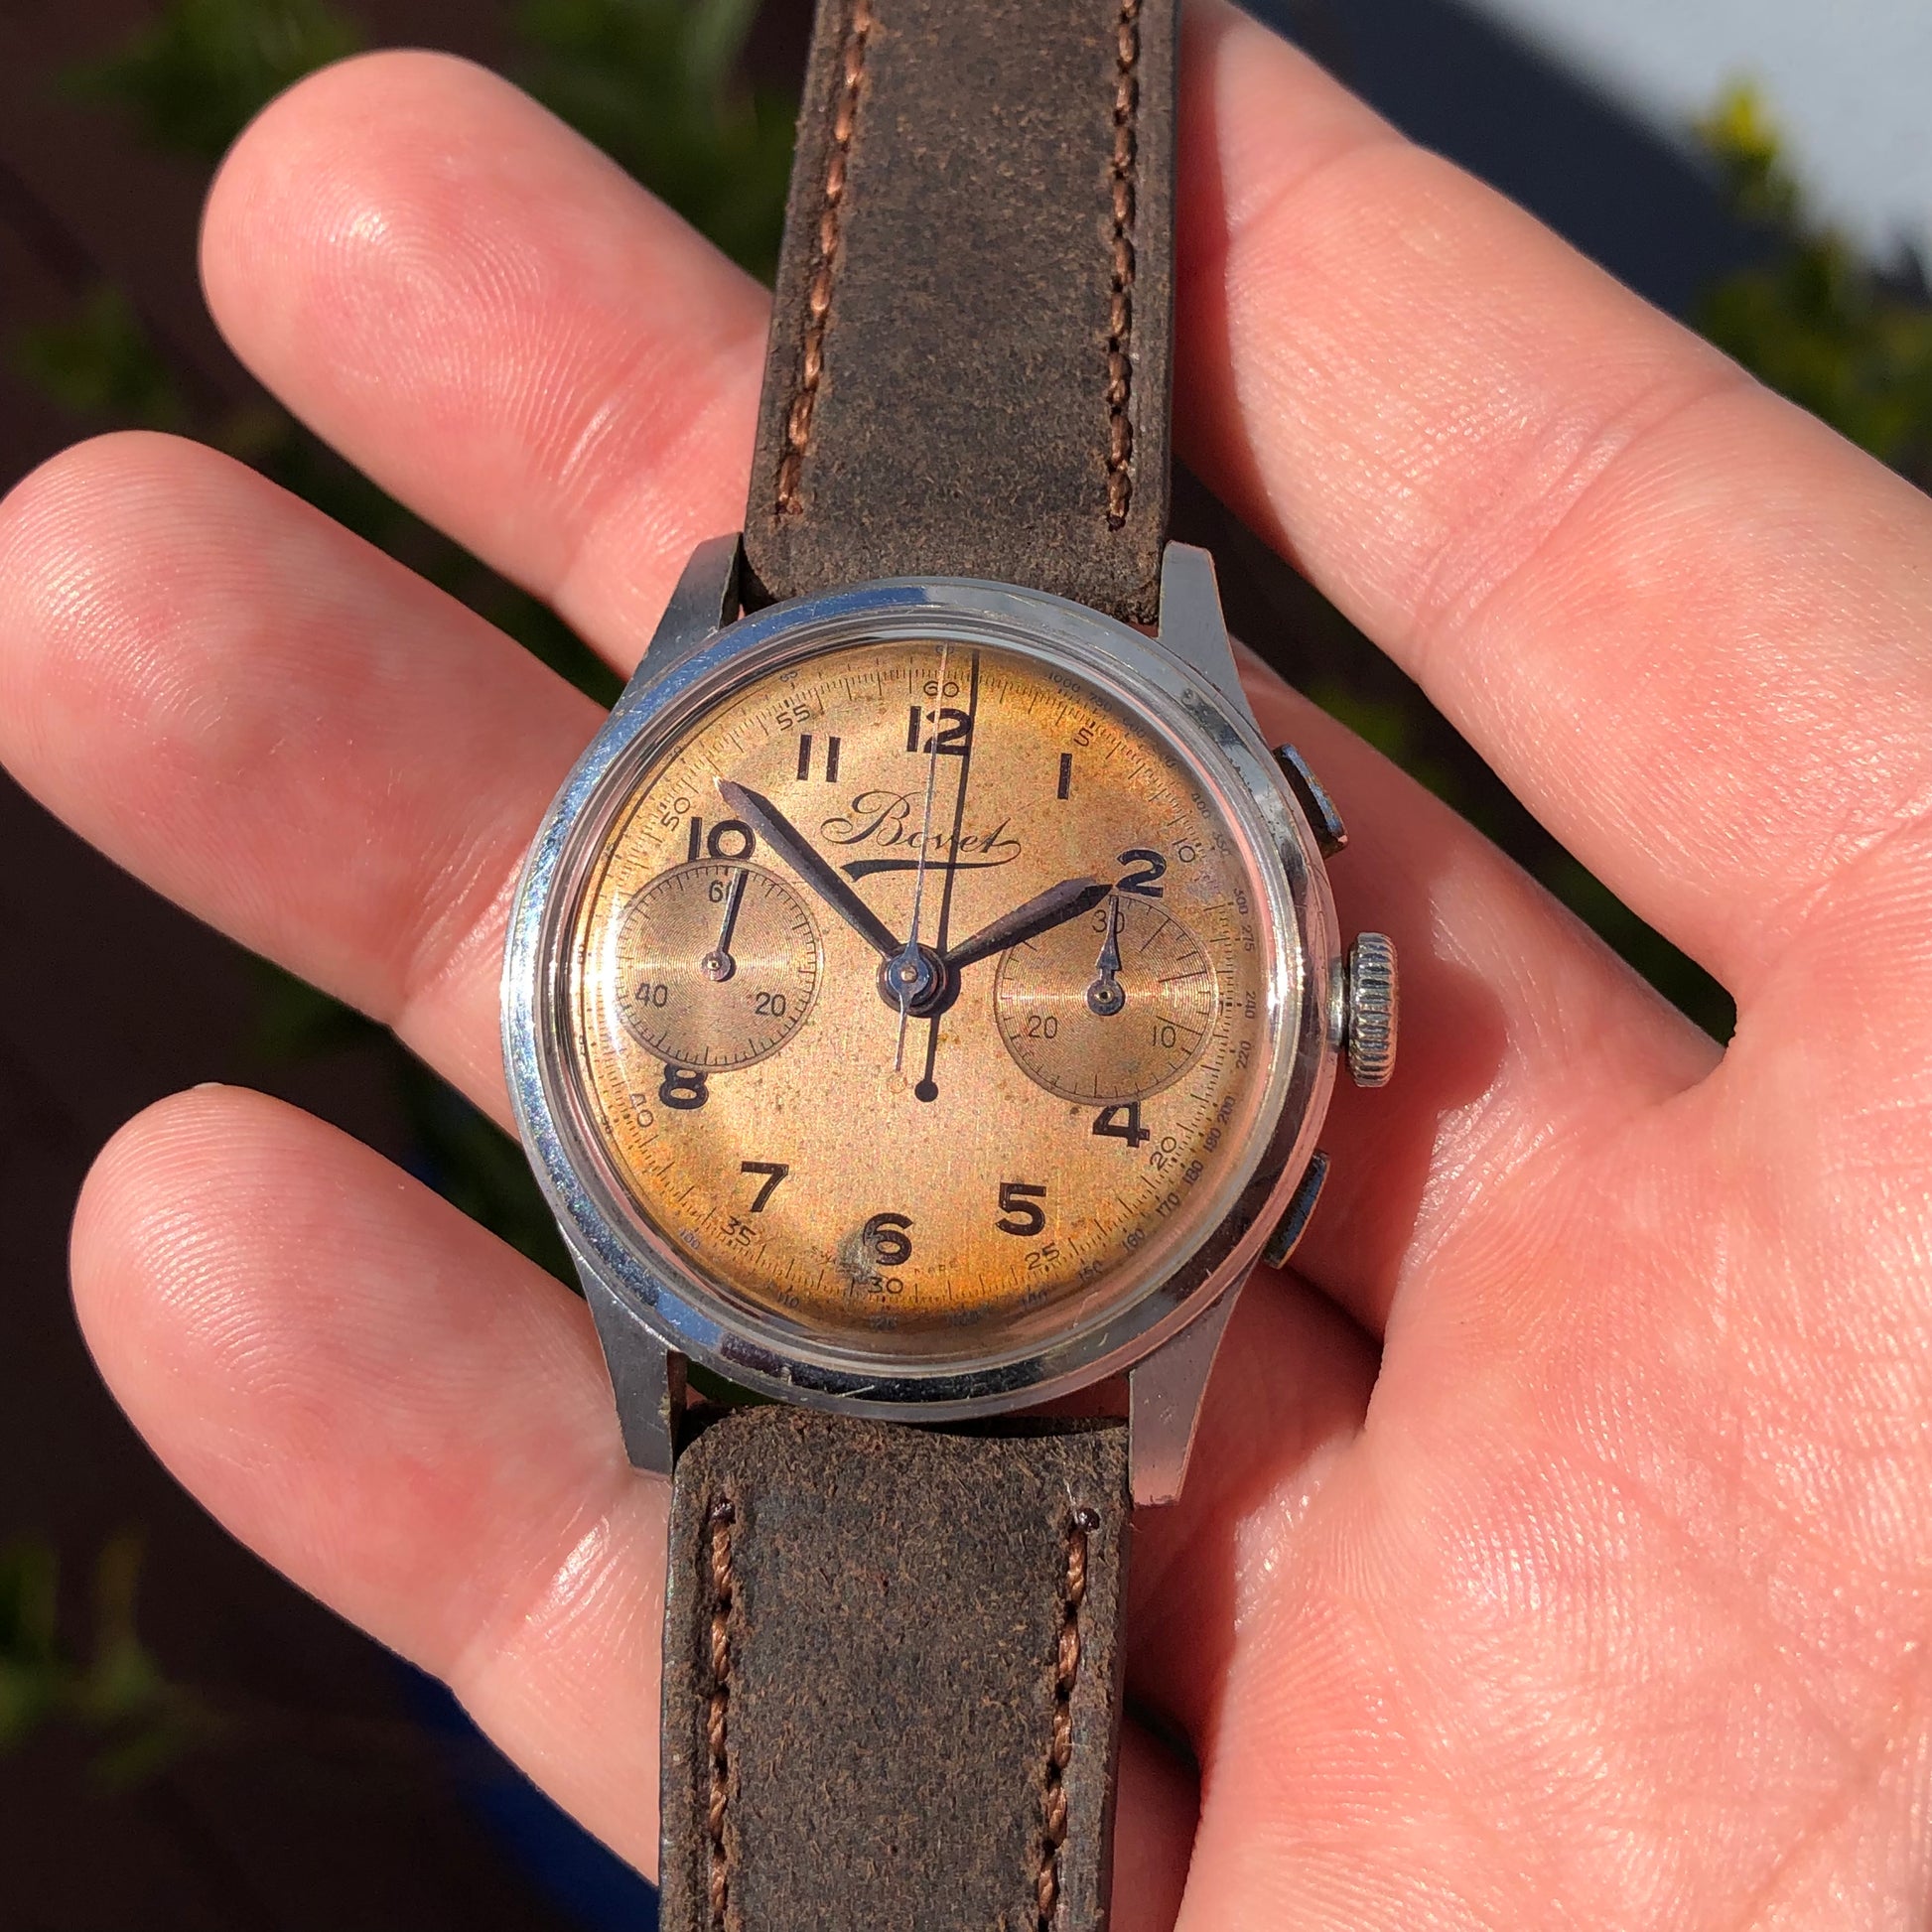 1950s Vintage Bovet Chronograph Manual Wind Tropical Patina Wristwatch - Hashtag Watch Company